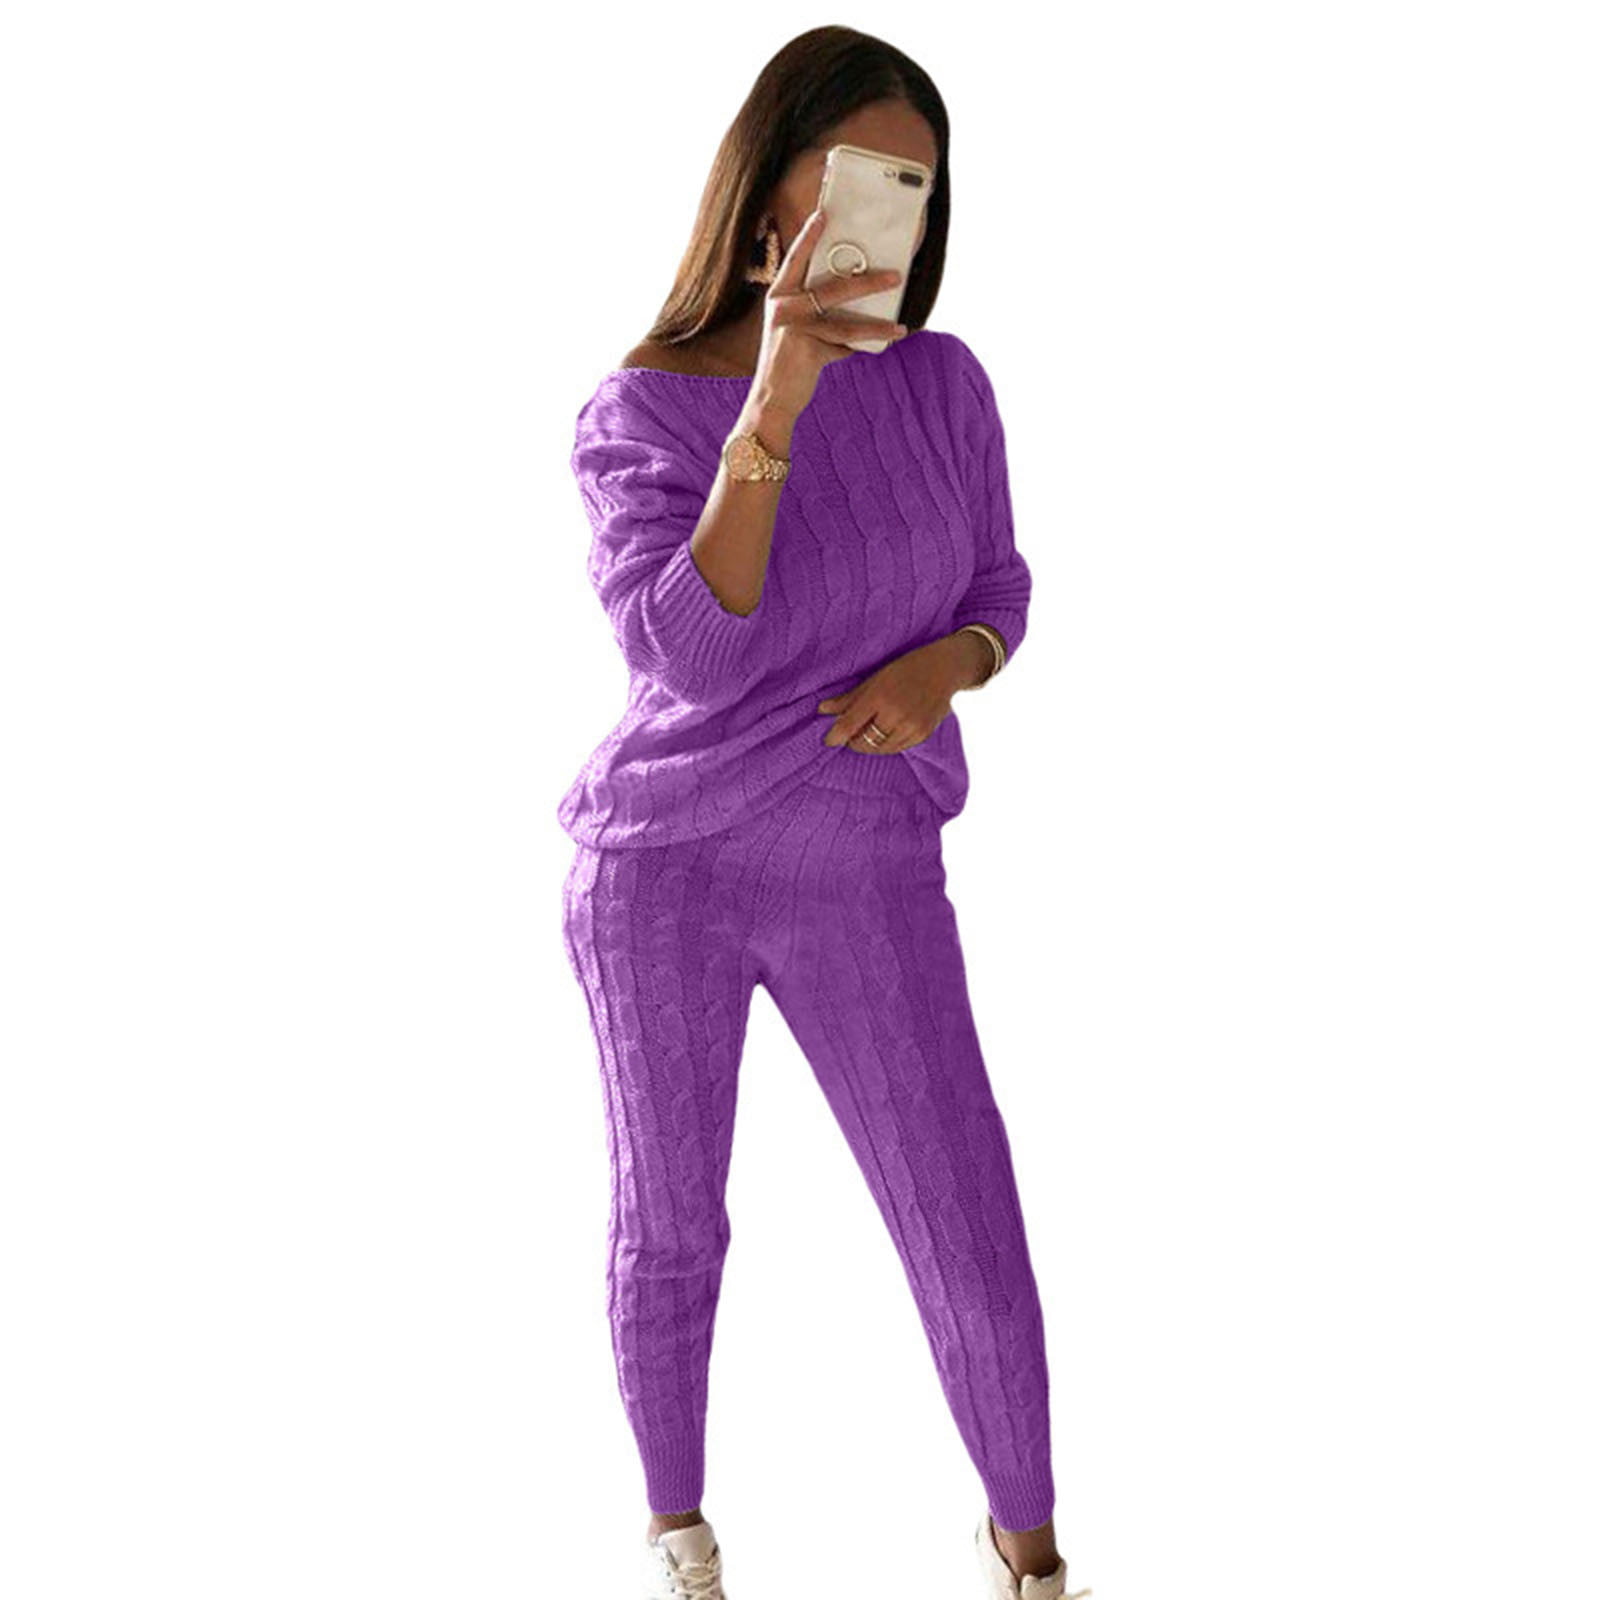 UTTOASFAY Plus Size Women Clearance Picks Shoulder Color Purple 18(Xxxxxl) Set Warm Long Two-Piece Sweater Sleeve Solid Pants Knitted Suit Cable off Womens Flash Long Pants